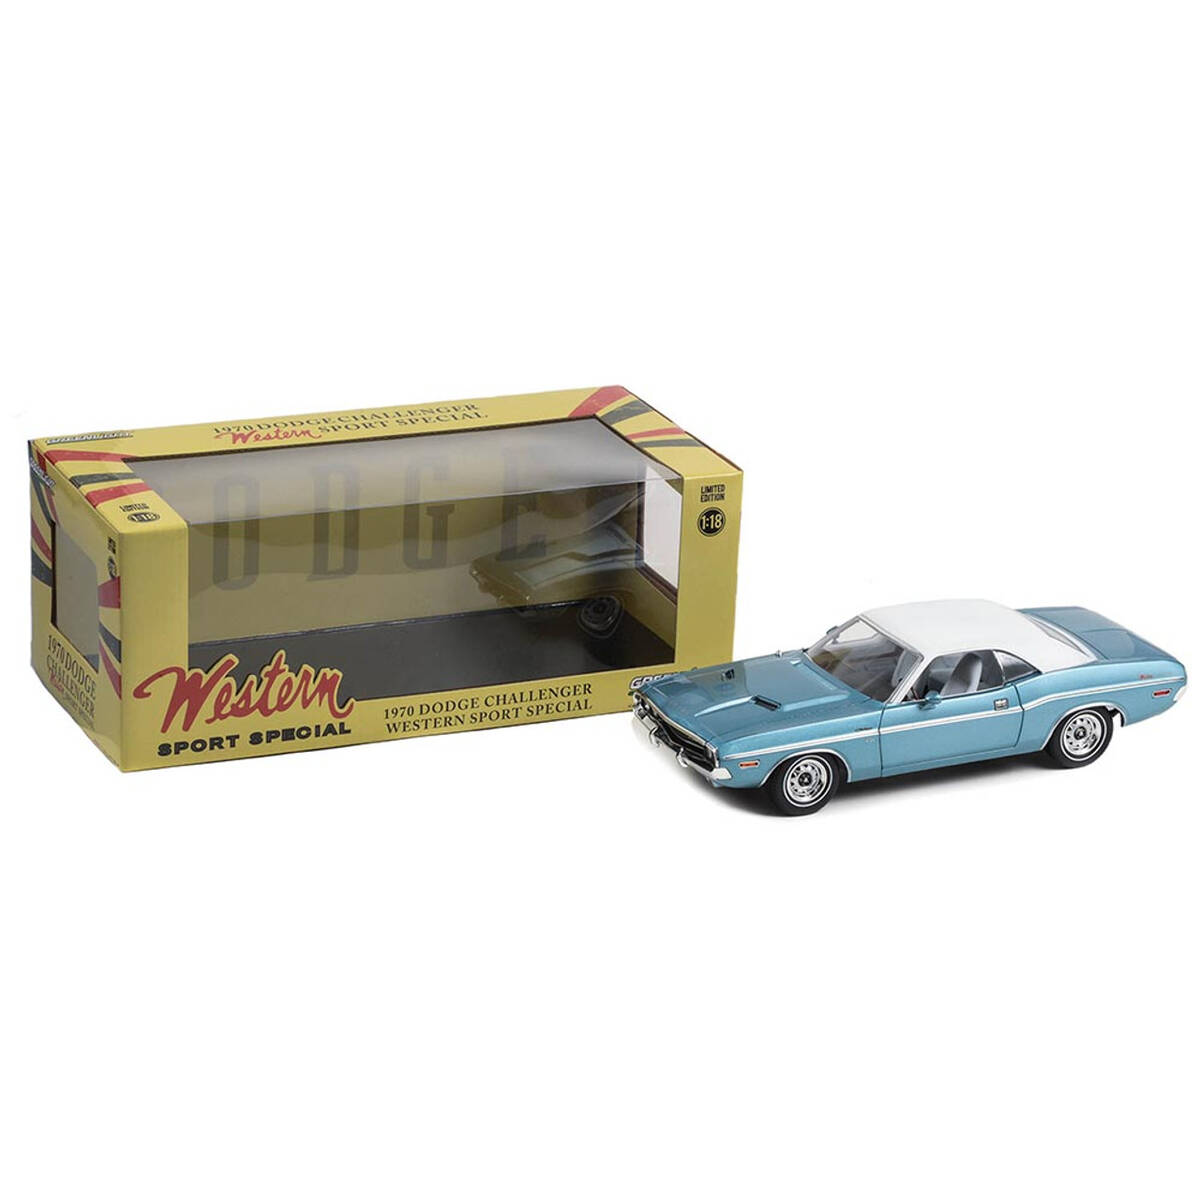 Greenlight 1/18 1970 Dodge Challenger - Western Sport Special - Light Blue Poly with Vinyl Roof and White Interior 13644